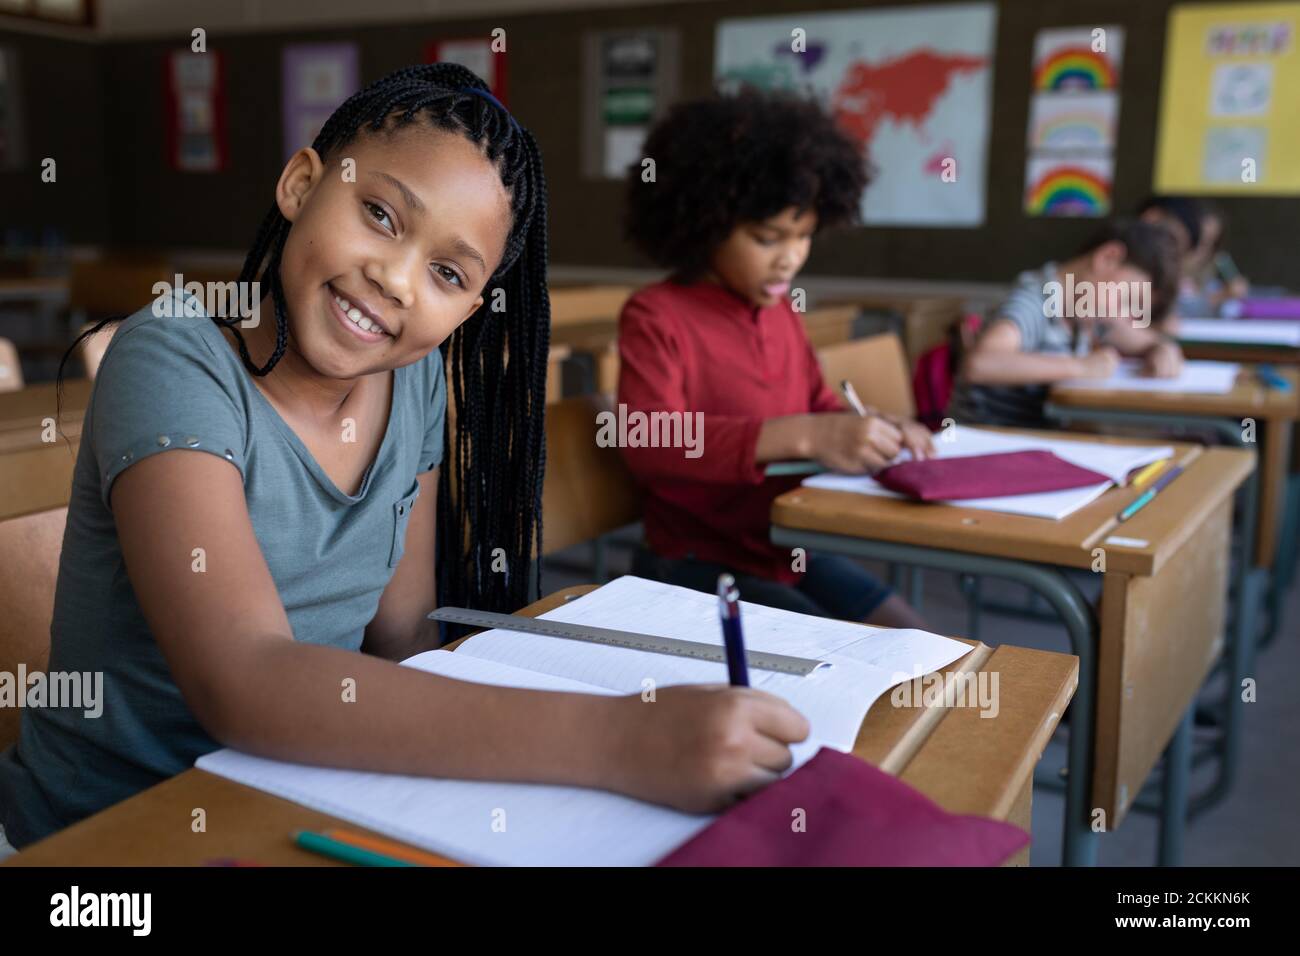 Portrait of girl smiling while sitting on her desk at school Stock Photo